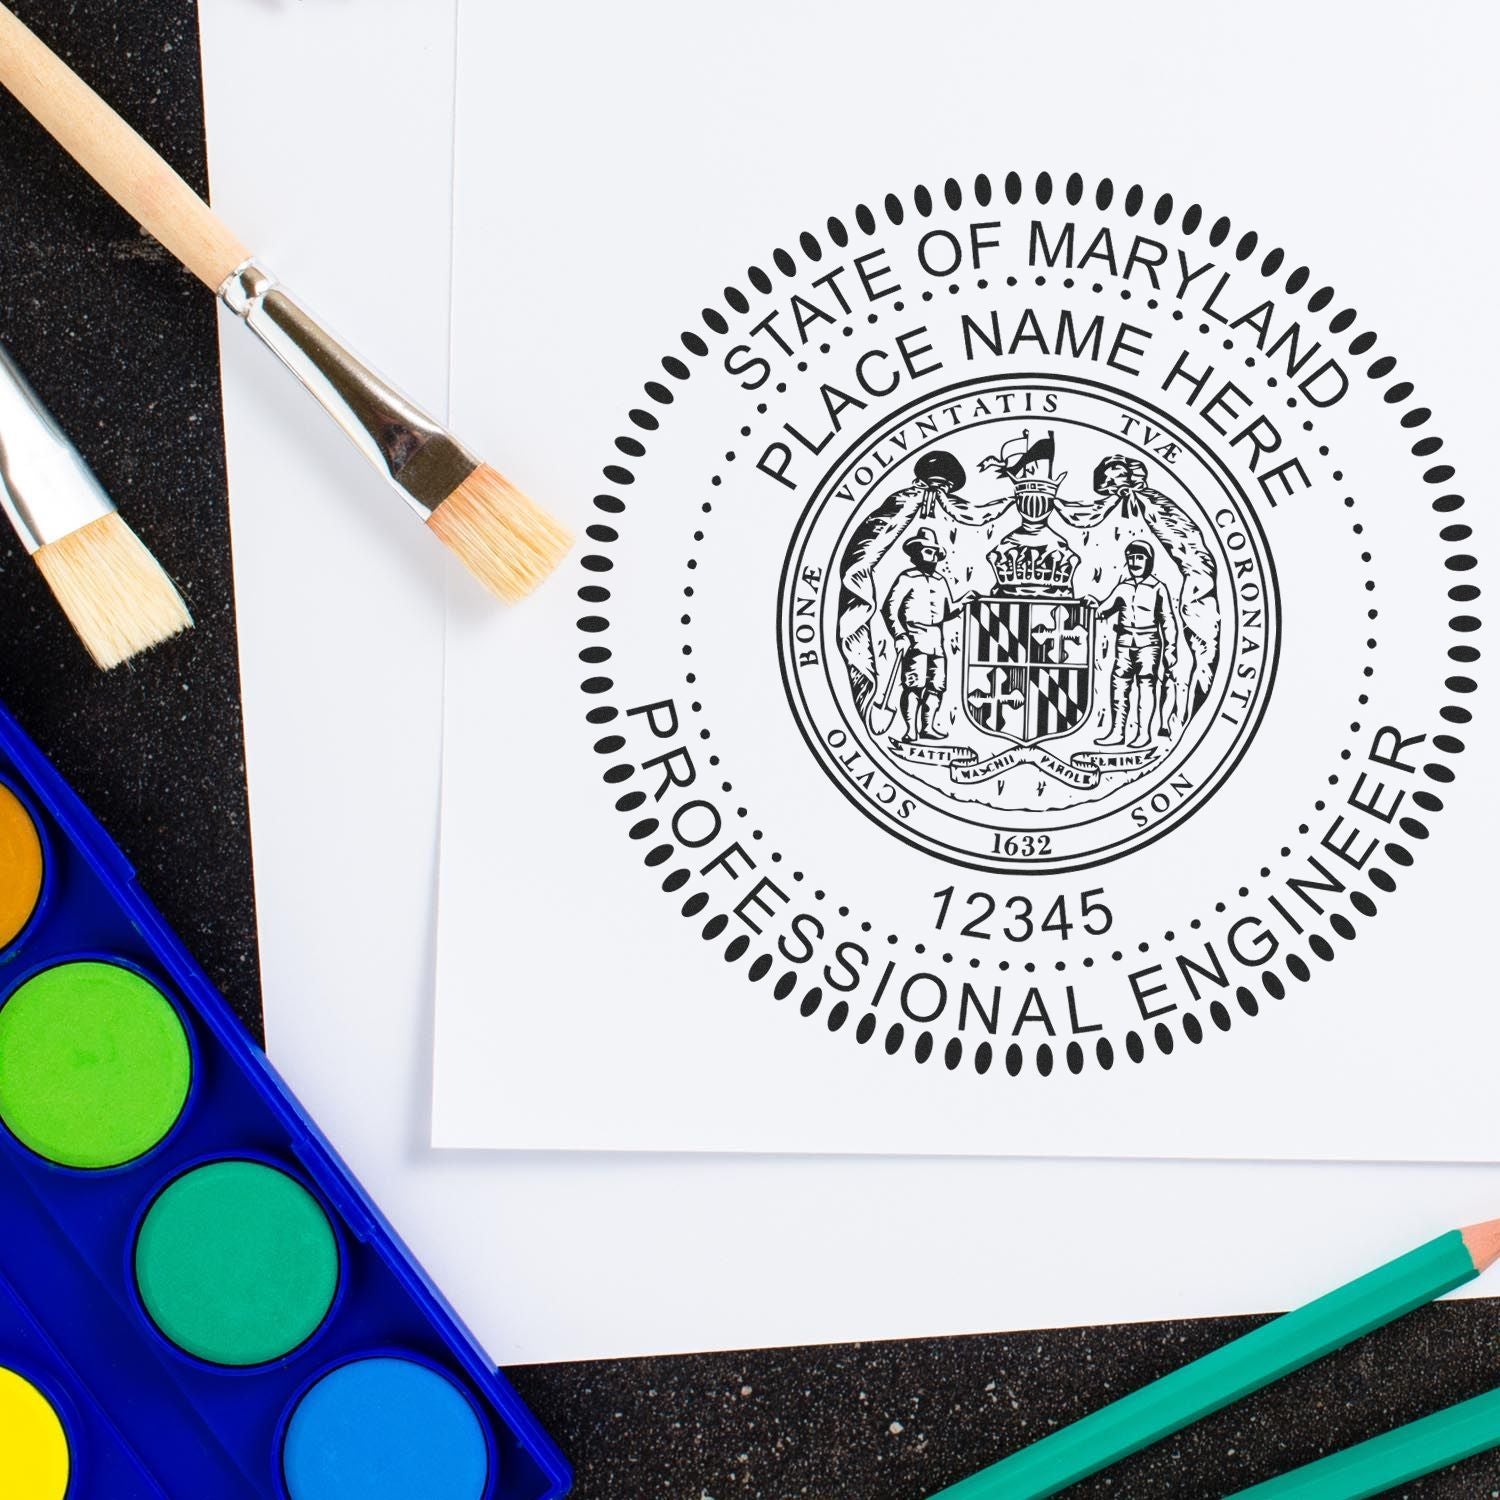 Renew and Excel: The Maryland PE Stamp Renewal Way Feature Image